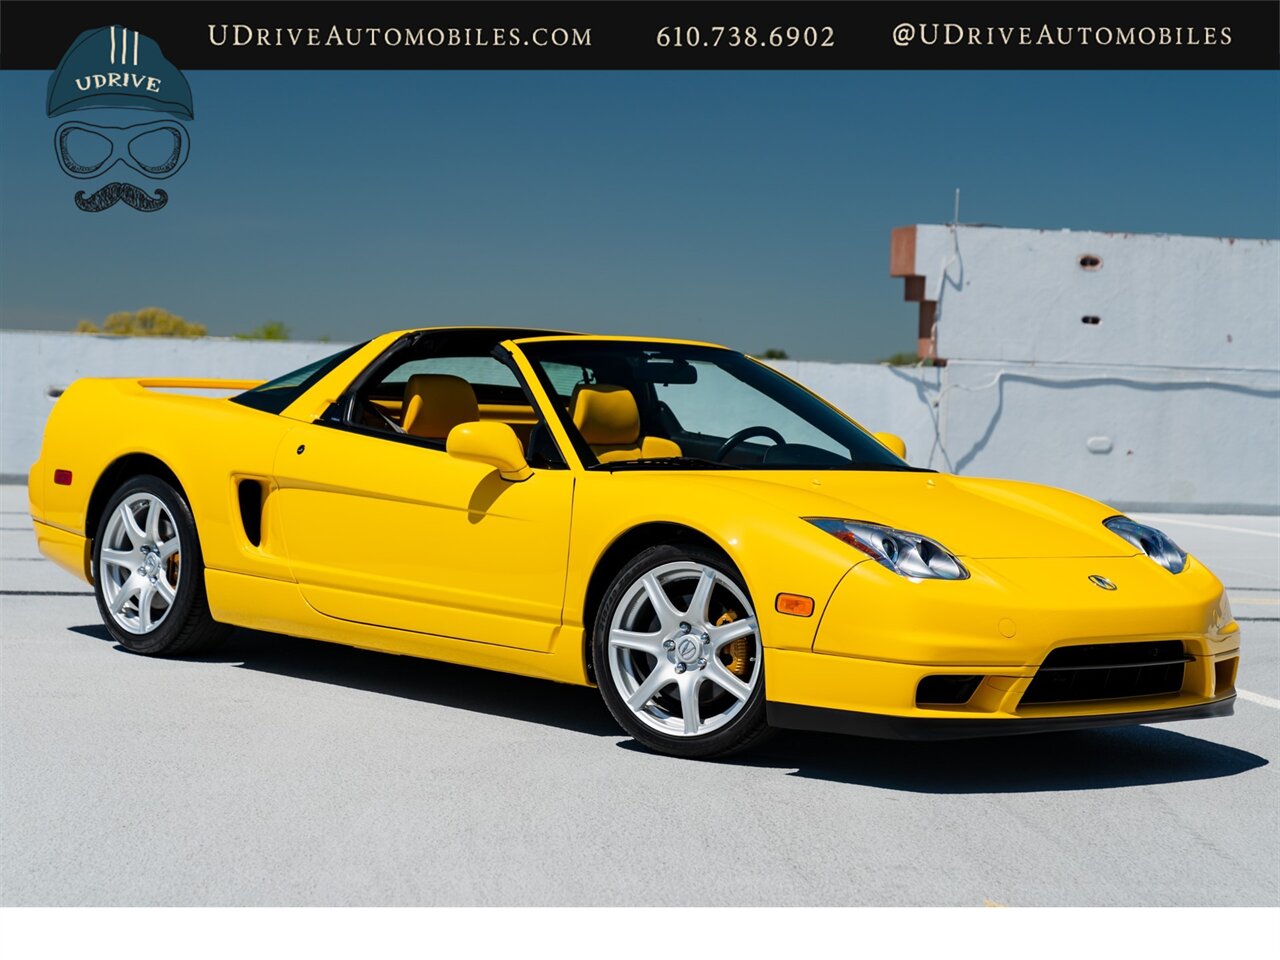 2003 Acura NSX NSX-T  Spa Yellow over Yellow Lthr 1 of 13 Produced - Photo 25 - West Chester, PA 19382